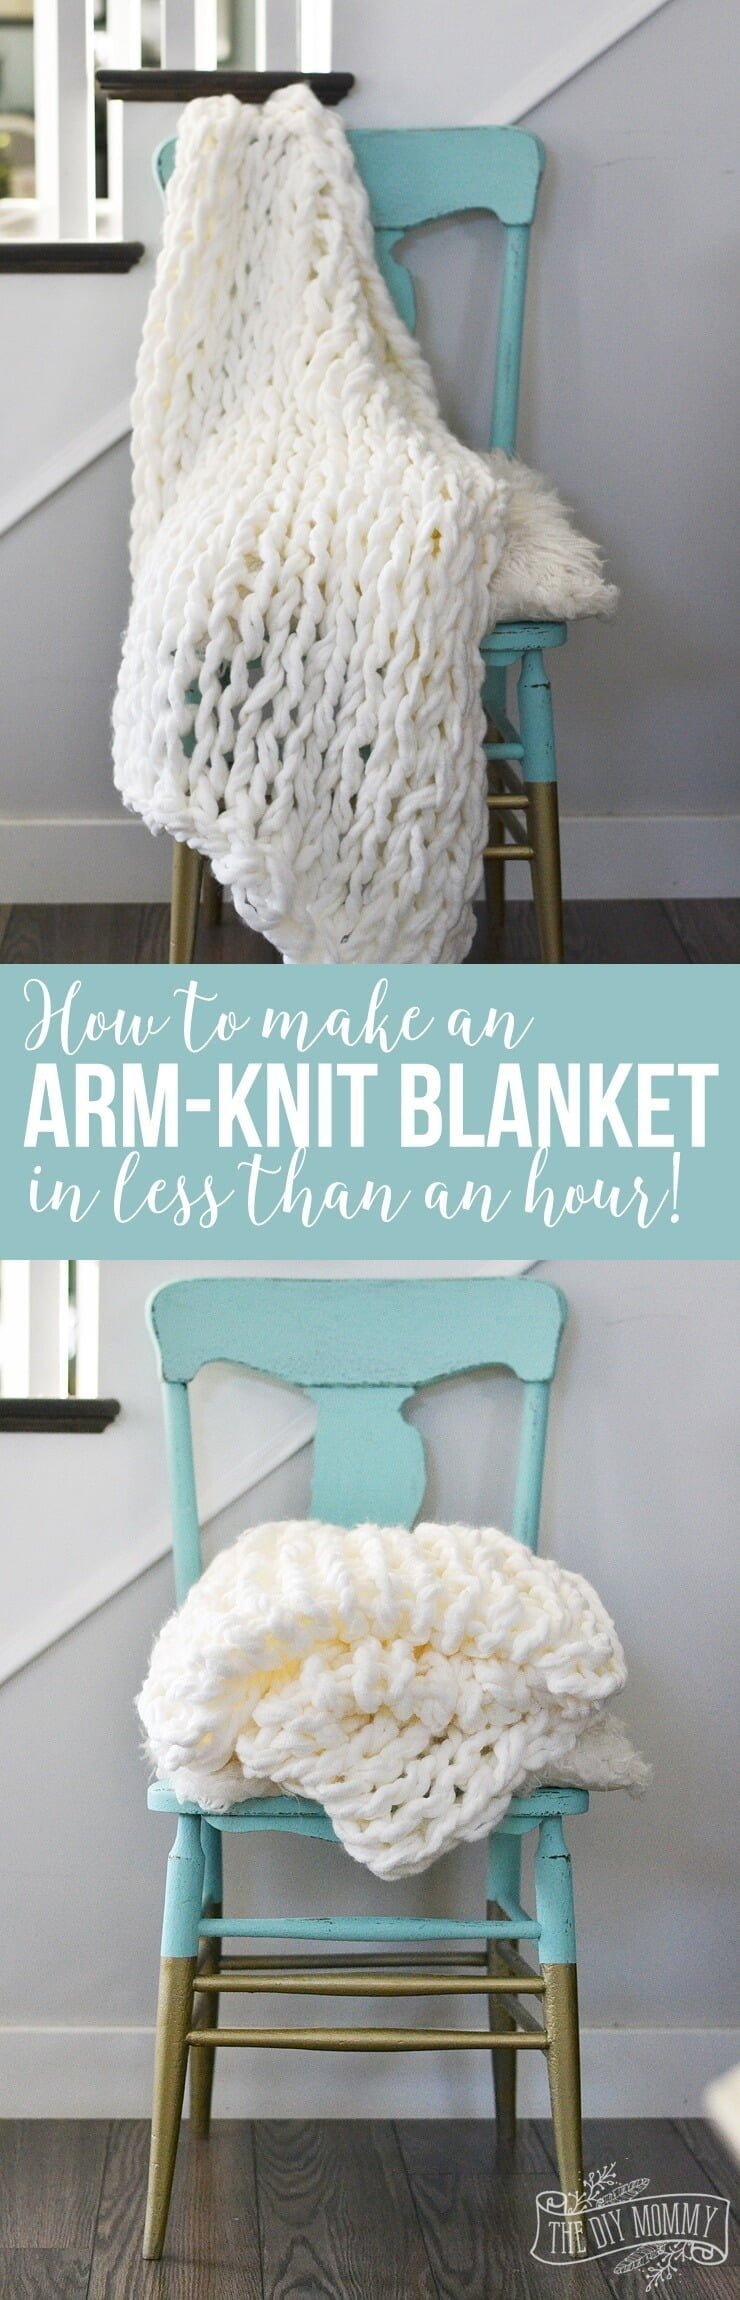 Quick and Easy Cozy Arm-Knit Blanket Project